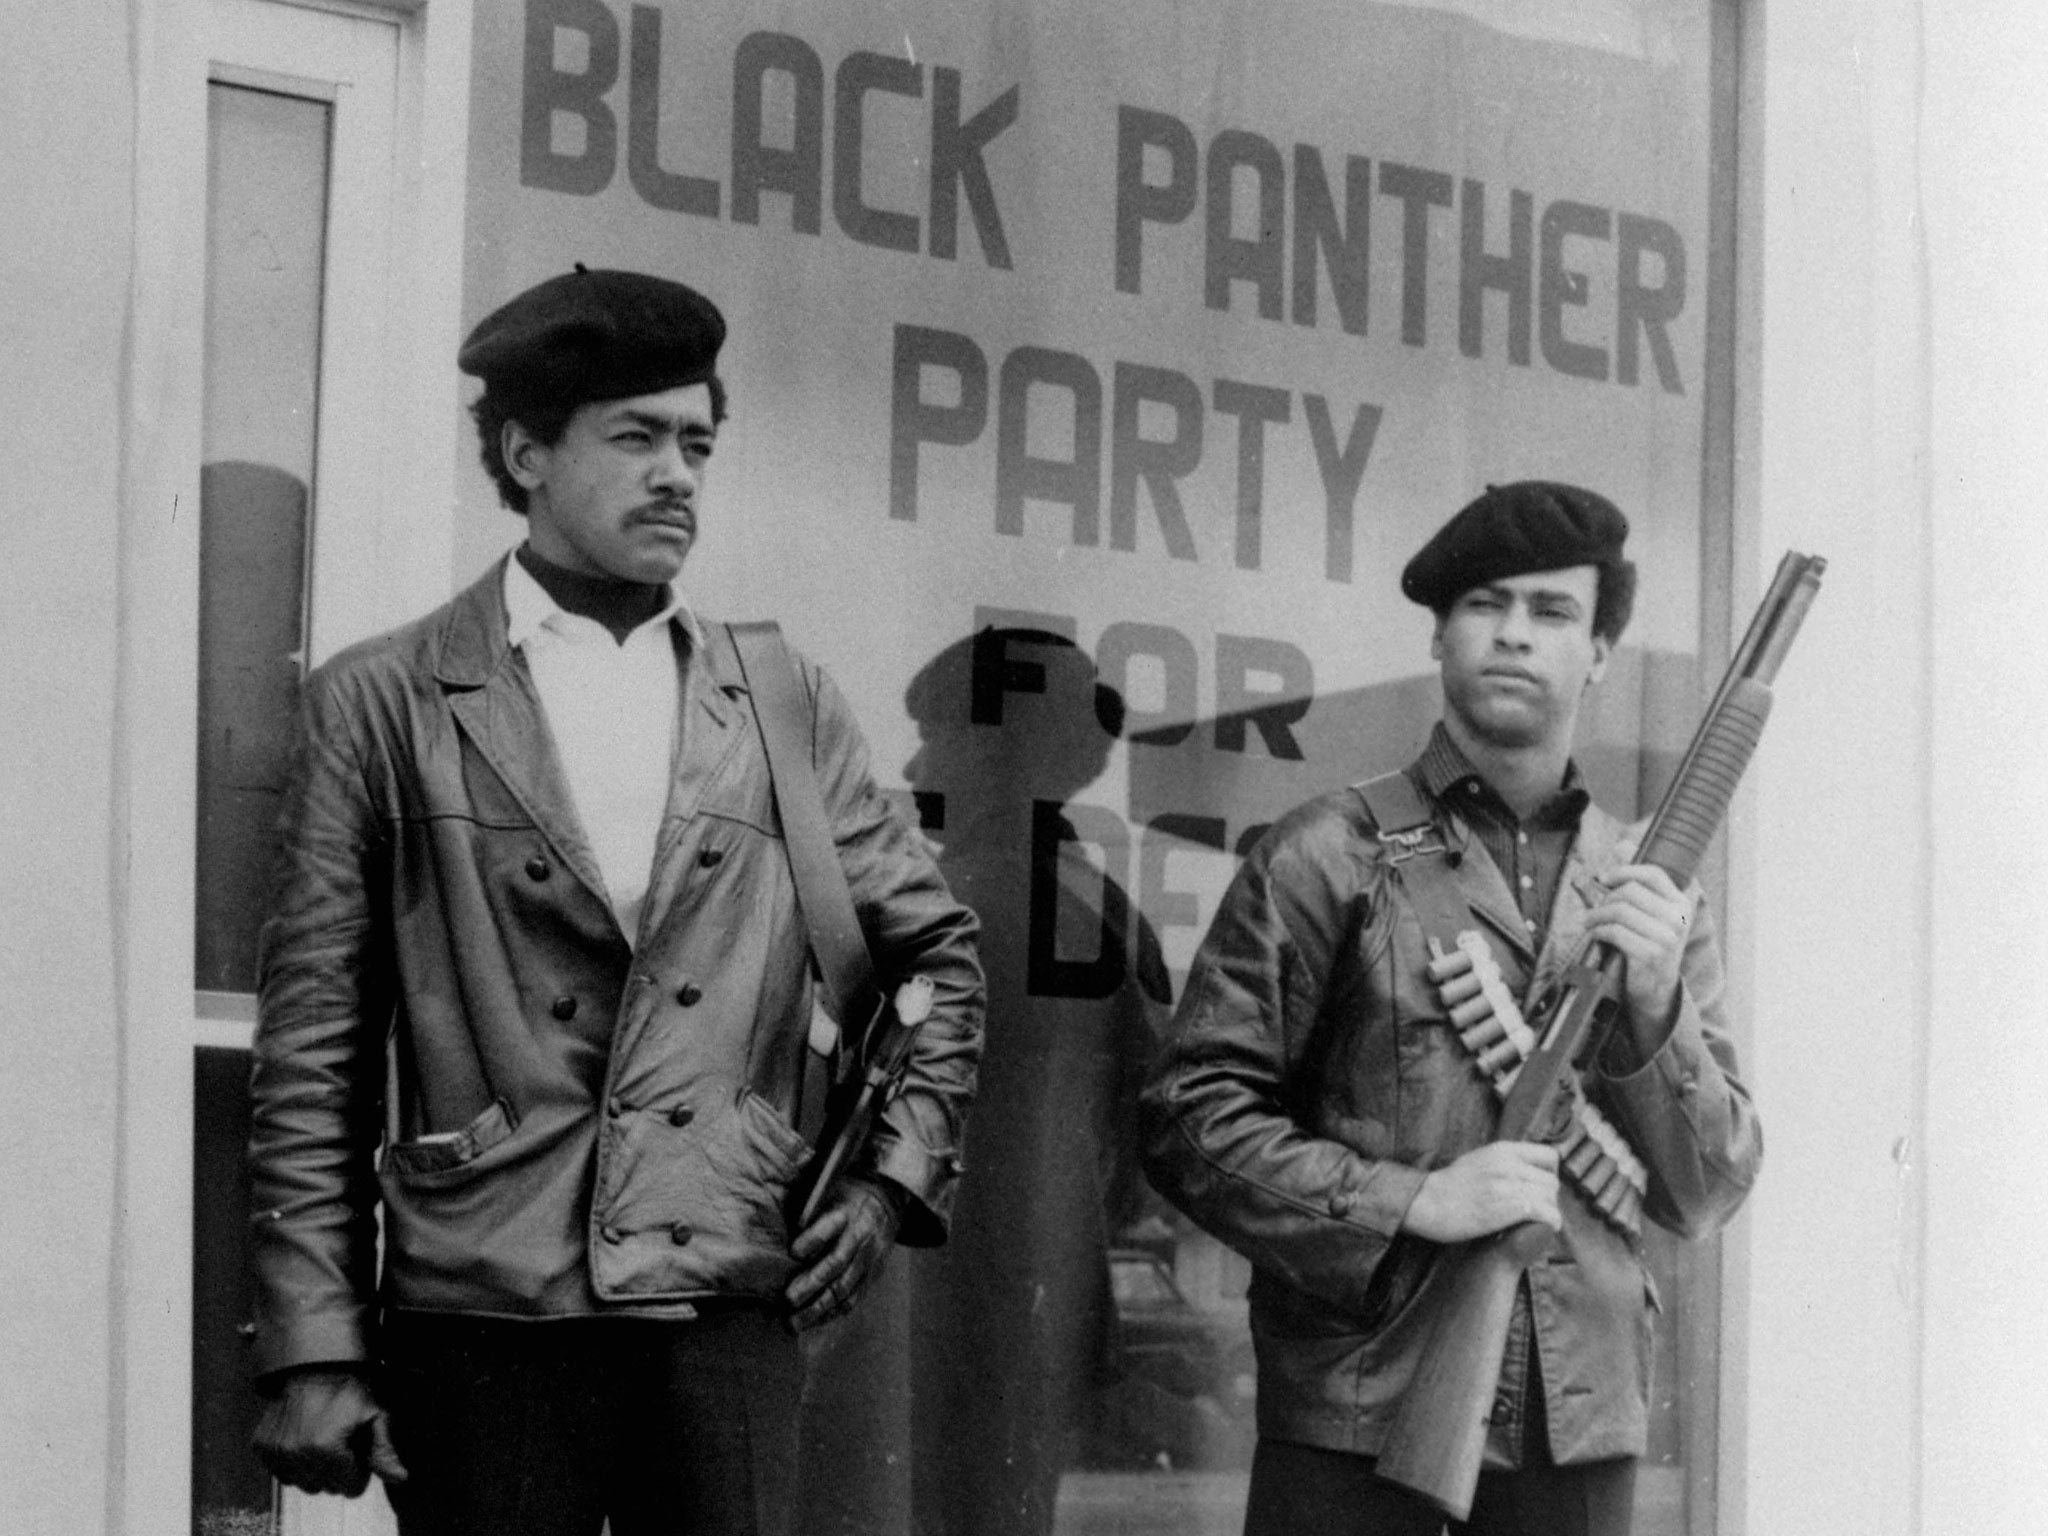 Black Panther chairman, Bobby Seale (left), with a colleague in Oakland, California